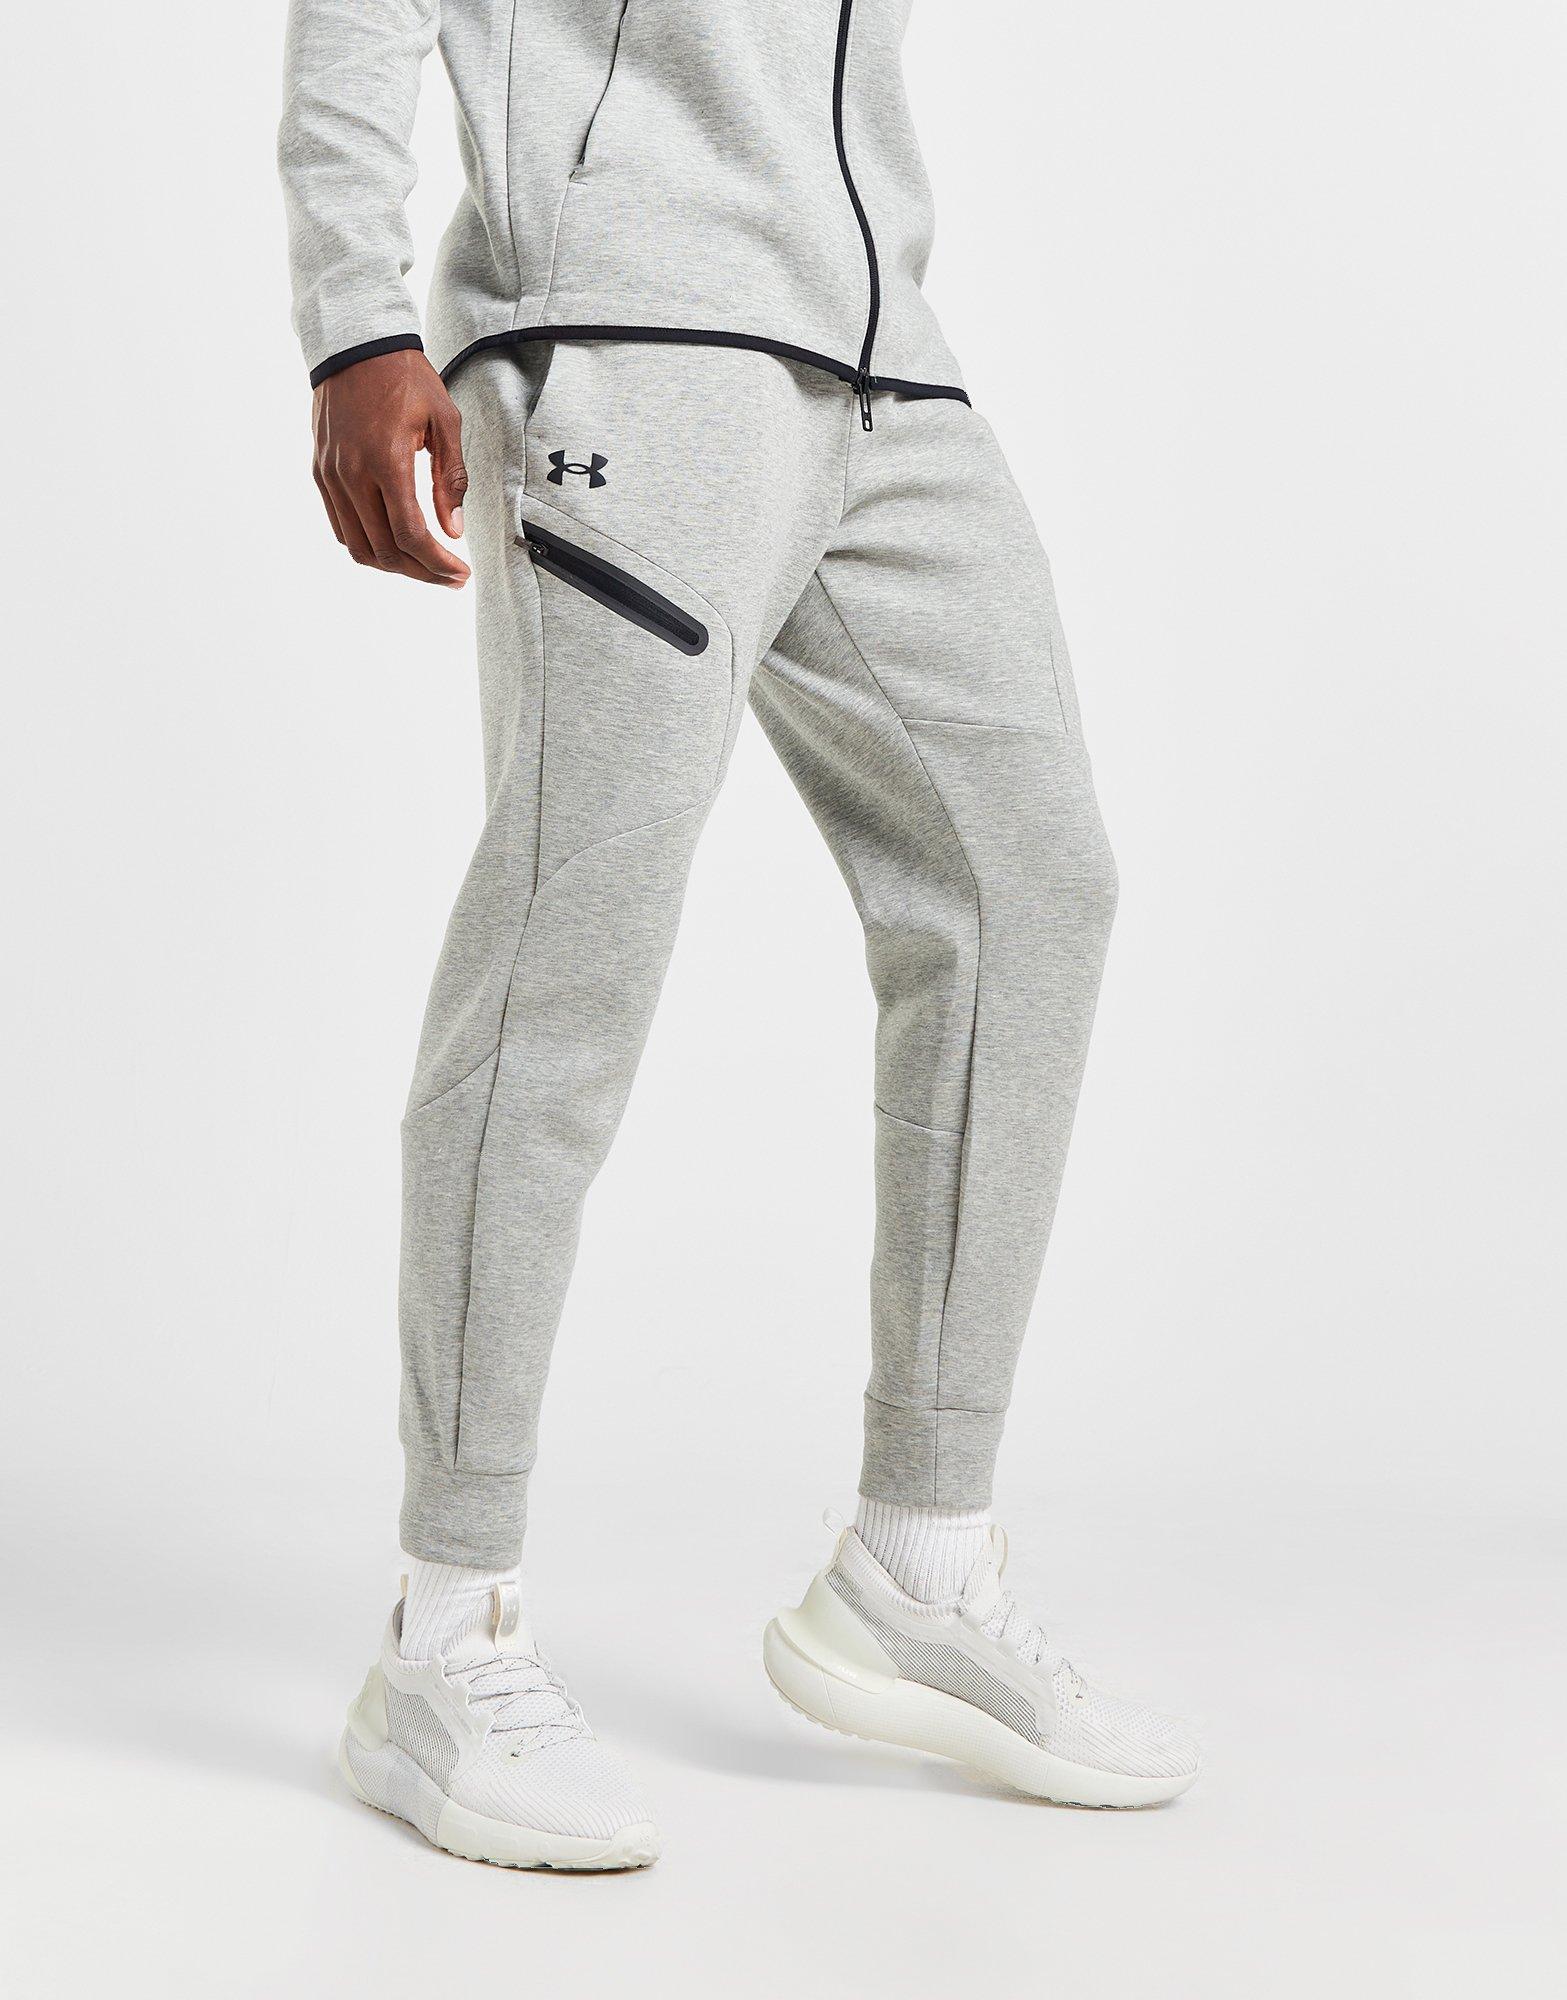 Under Armour, Unstoppable Fleece Joggers